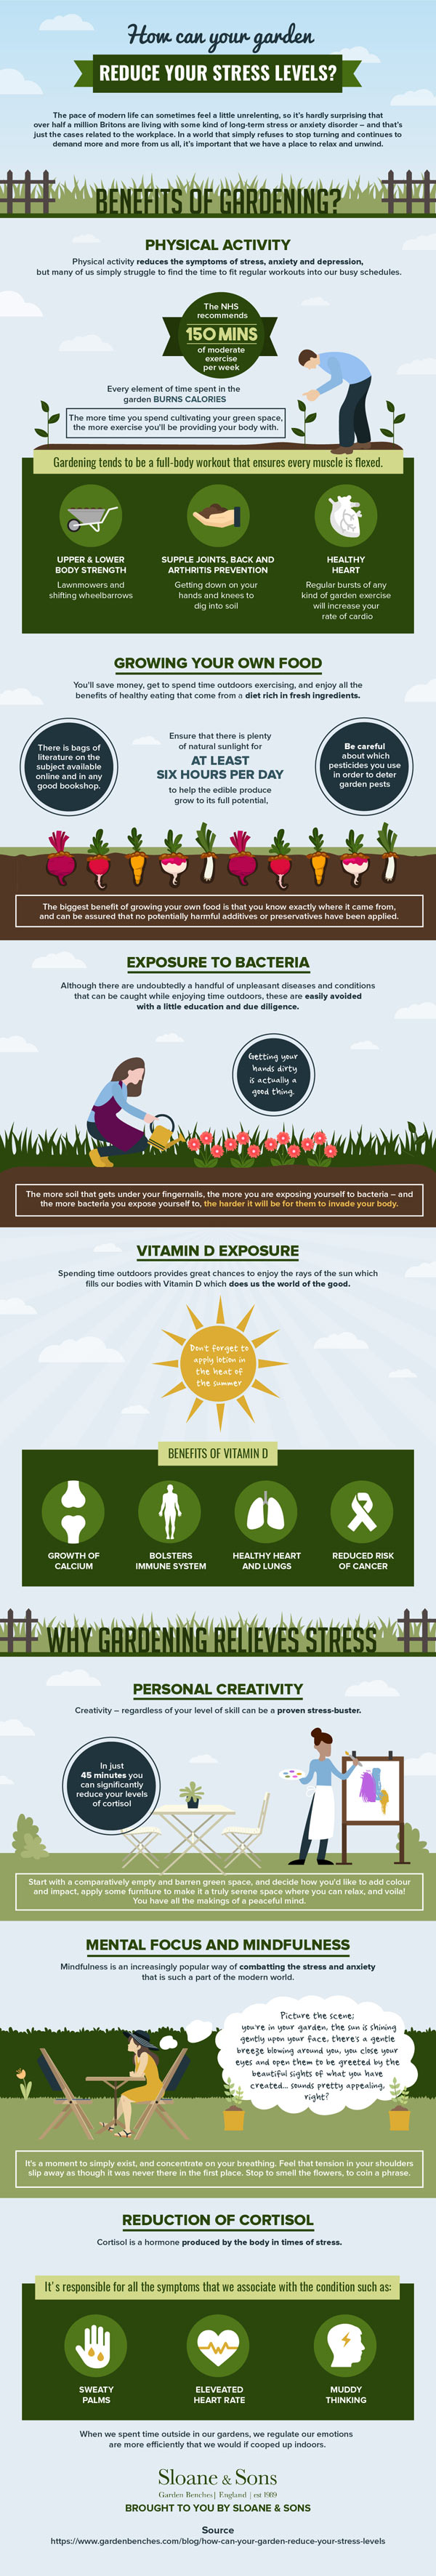 How-Gardening-Can-Reduce-Stress-infographic